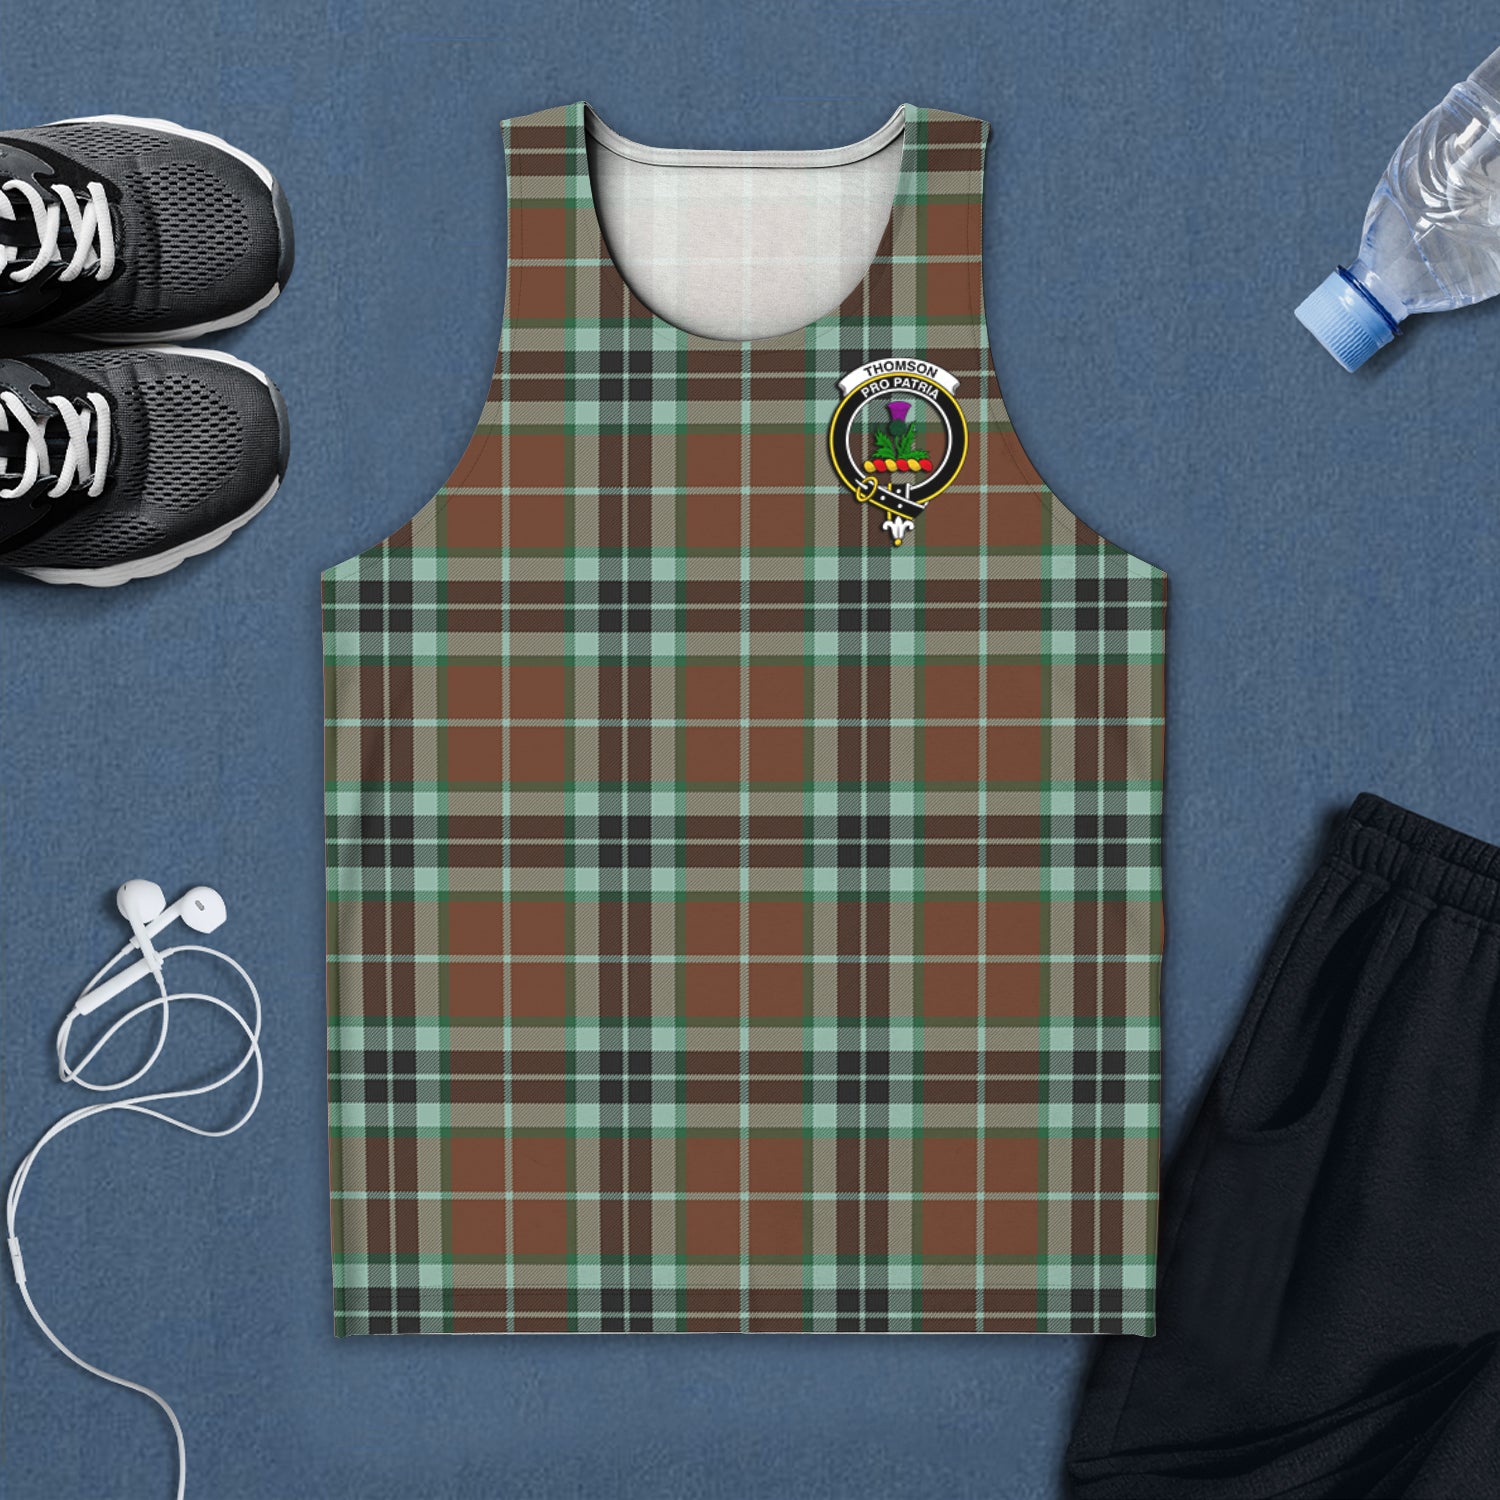 thomson-hunting-modern-tartan-mens-tank-top-with-family-crest